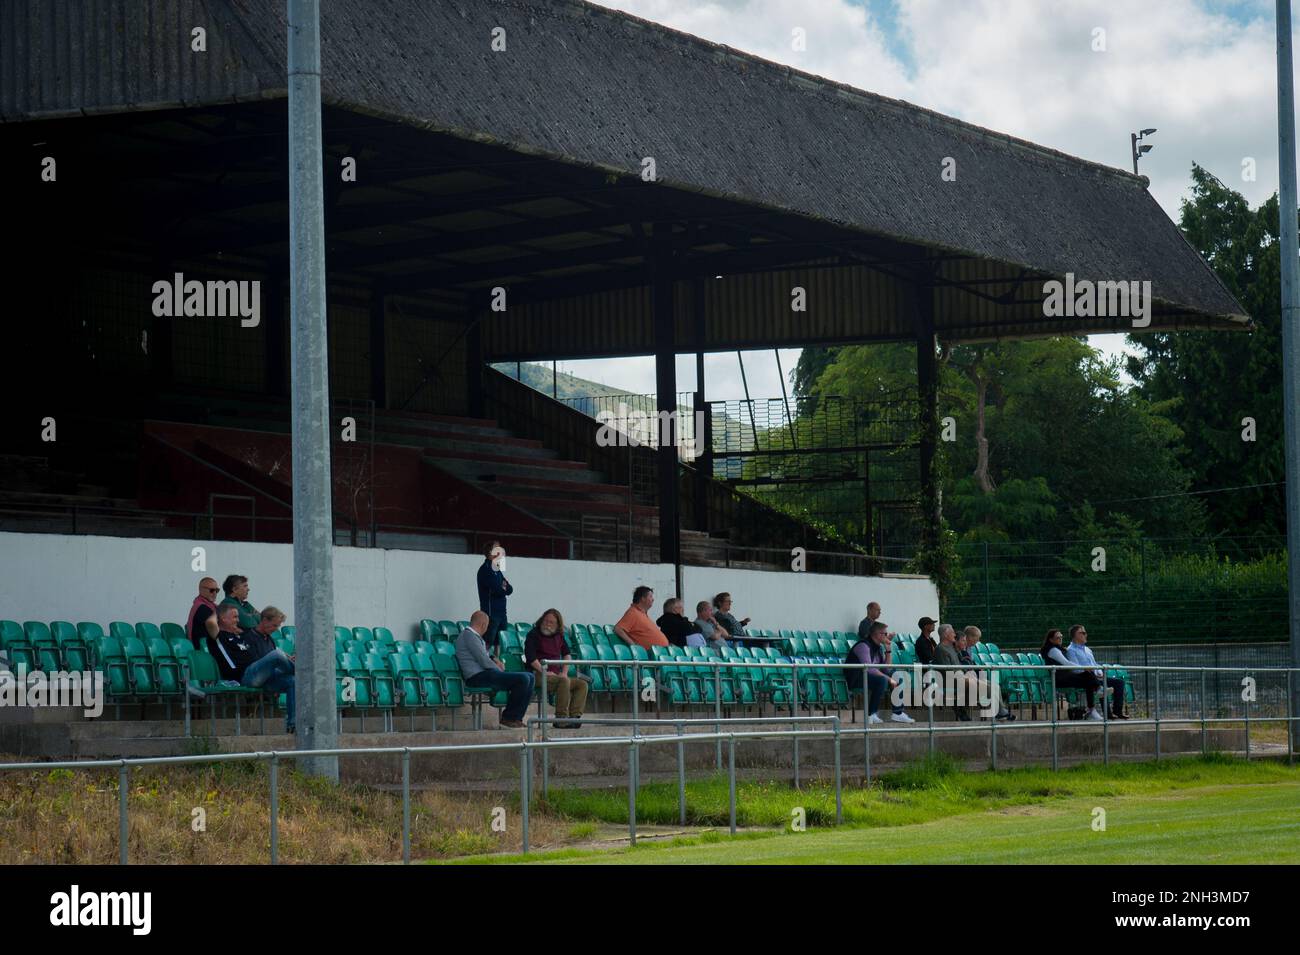 Abergavenny, Wales 14 August 2021. JD Welsh Cup Round One match between Abergavenny Town and Taffs Well. Stock Photo